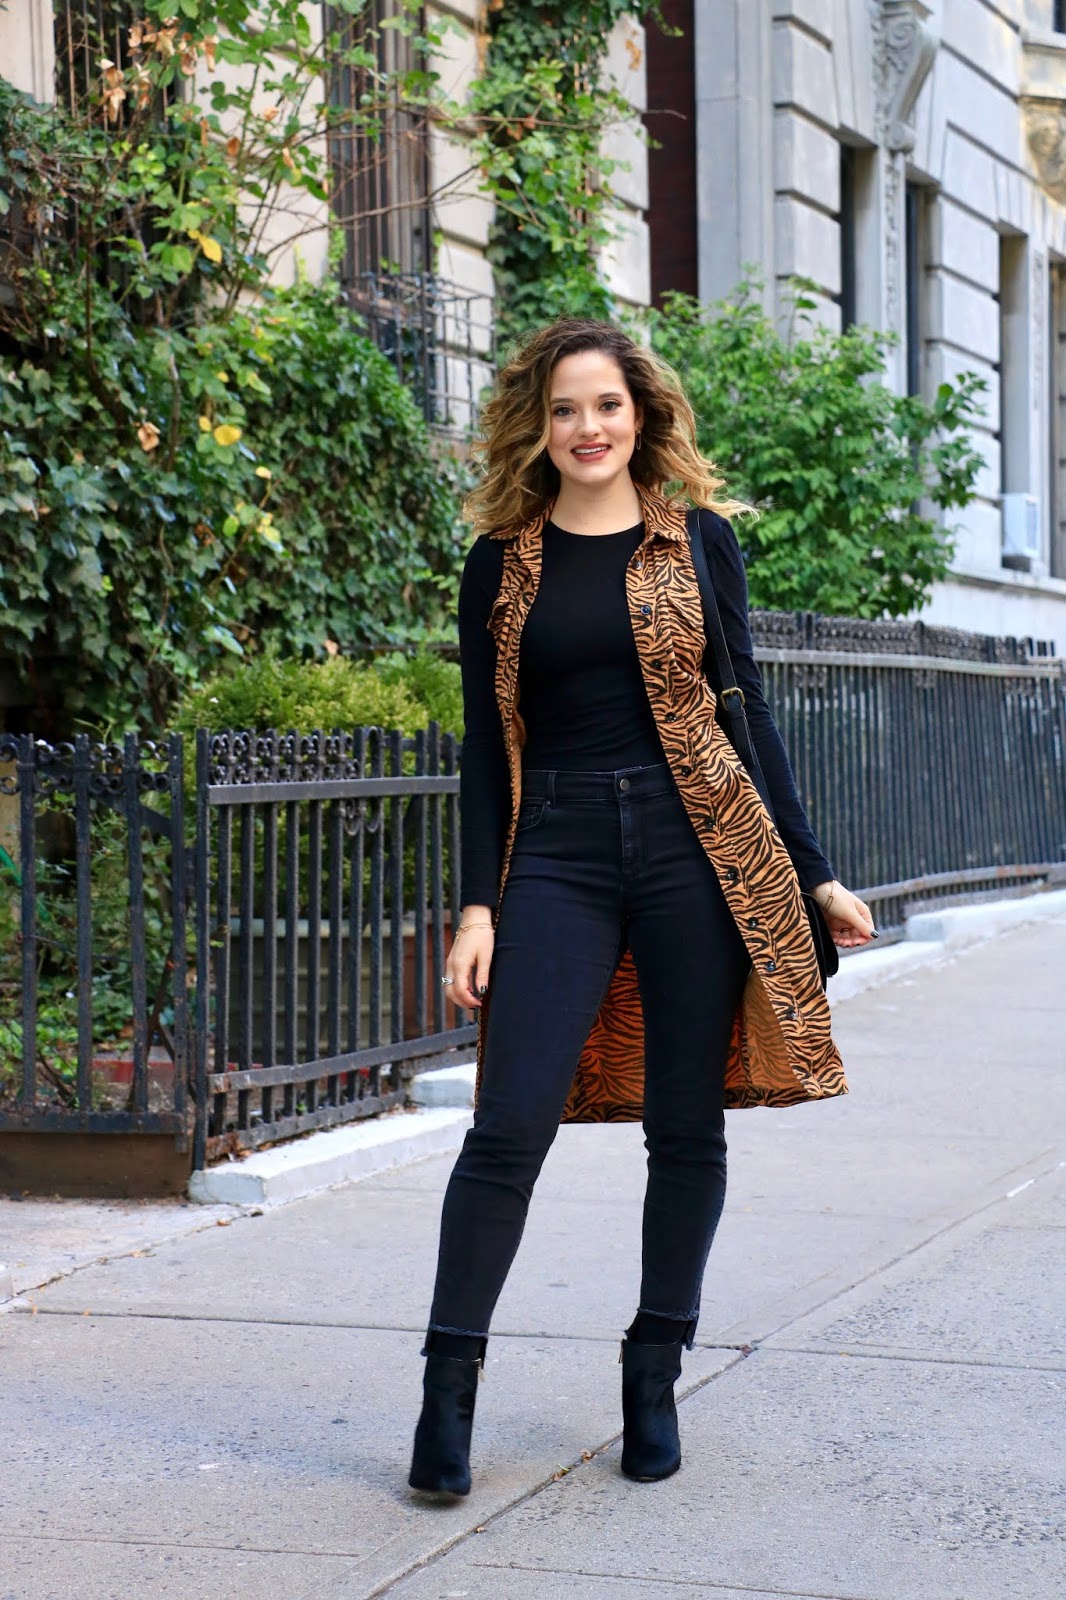 Nyc fashion blogger Kathleen Harper's animal print outfit idea for fall.